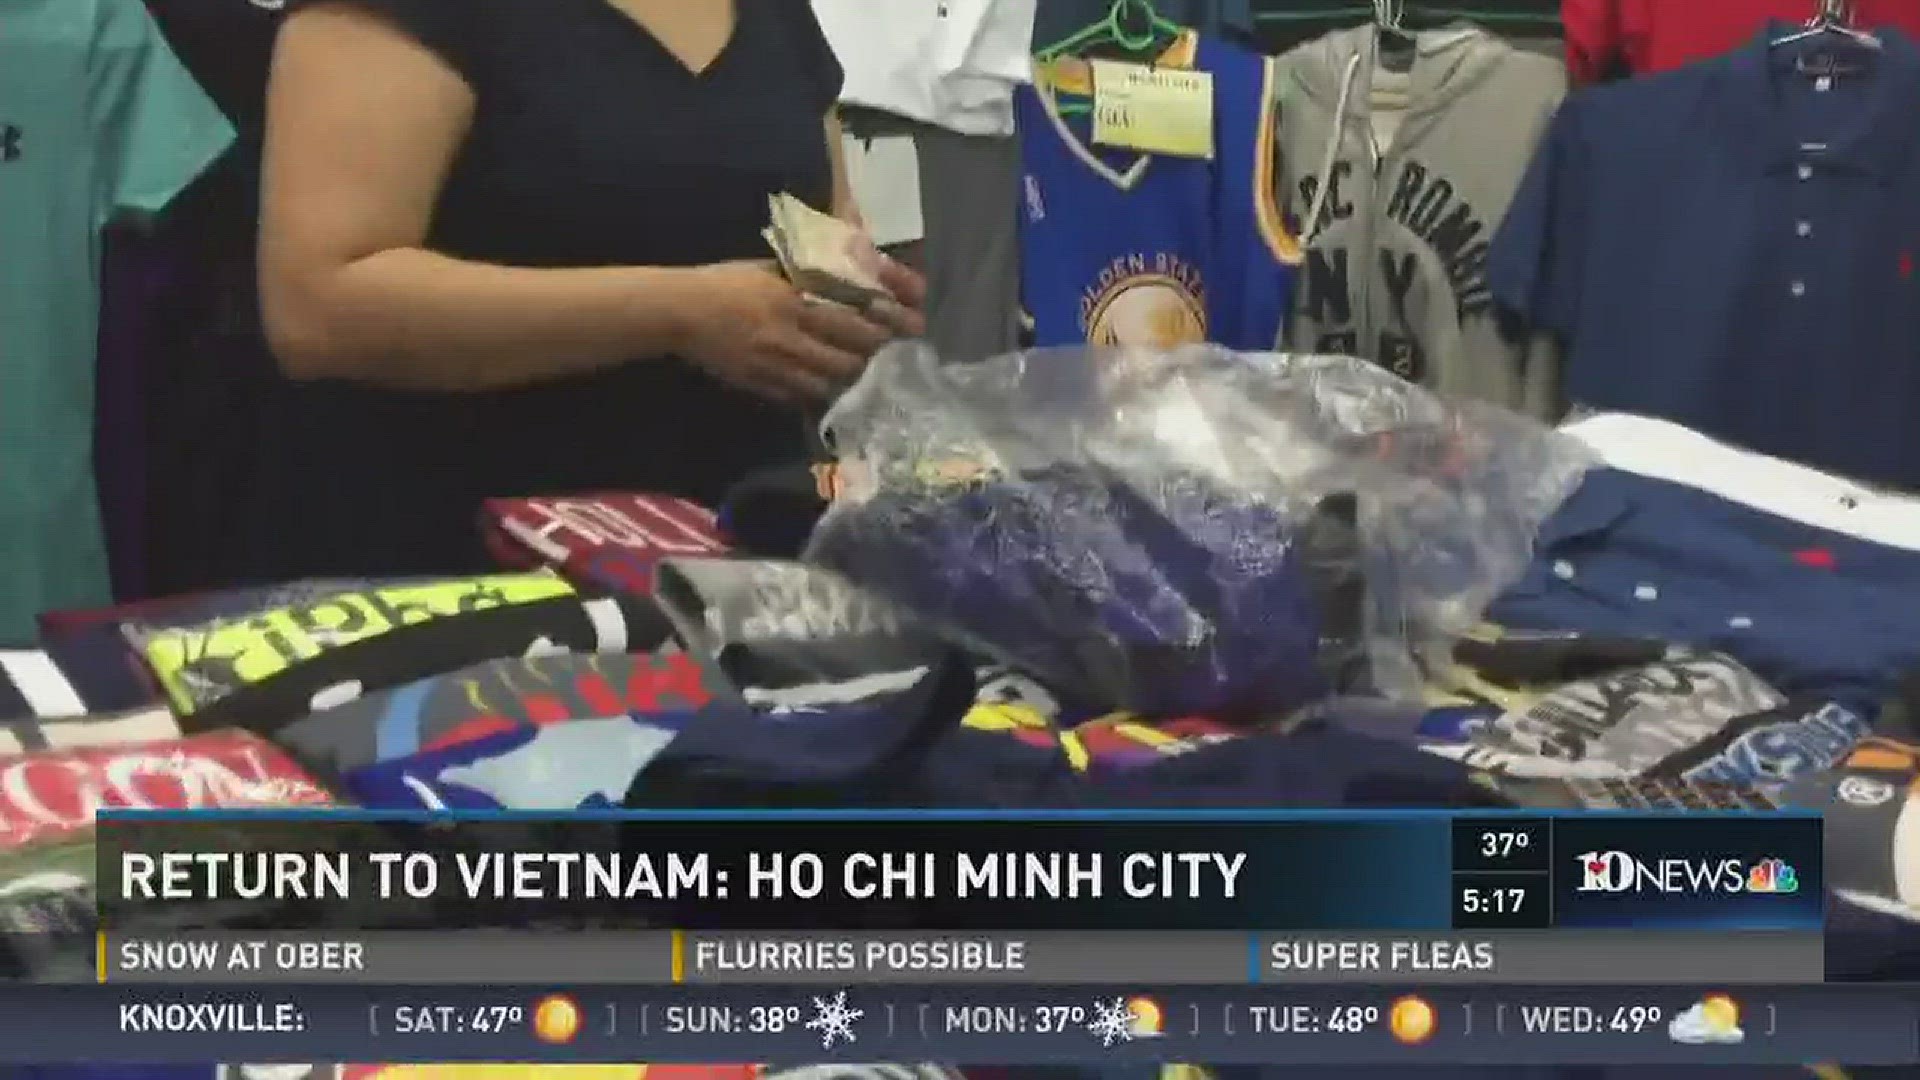 Vietnam veterans who have returned to Vietnam for the first time since the war are learning more about the people and life today in Ho Chi Minh City.